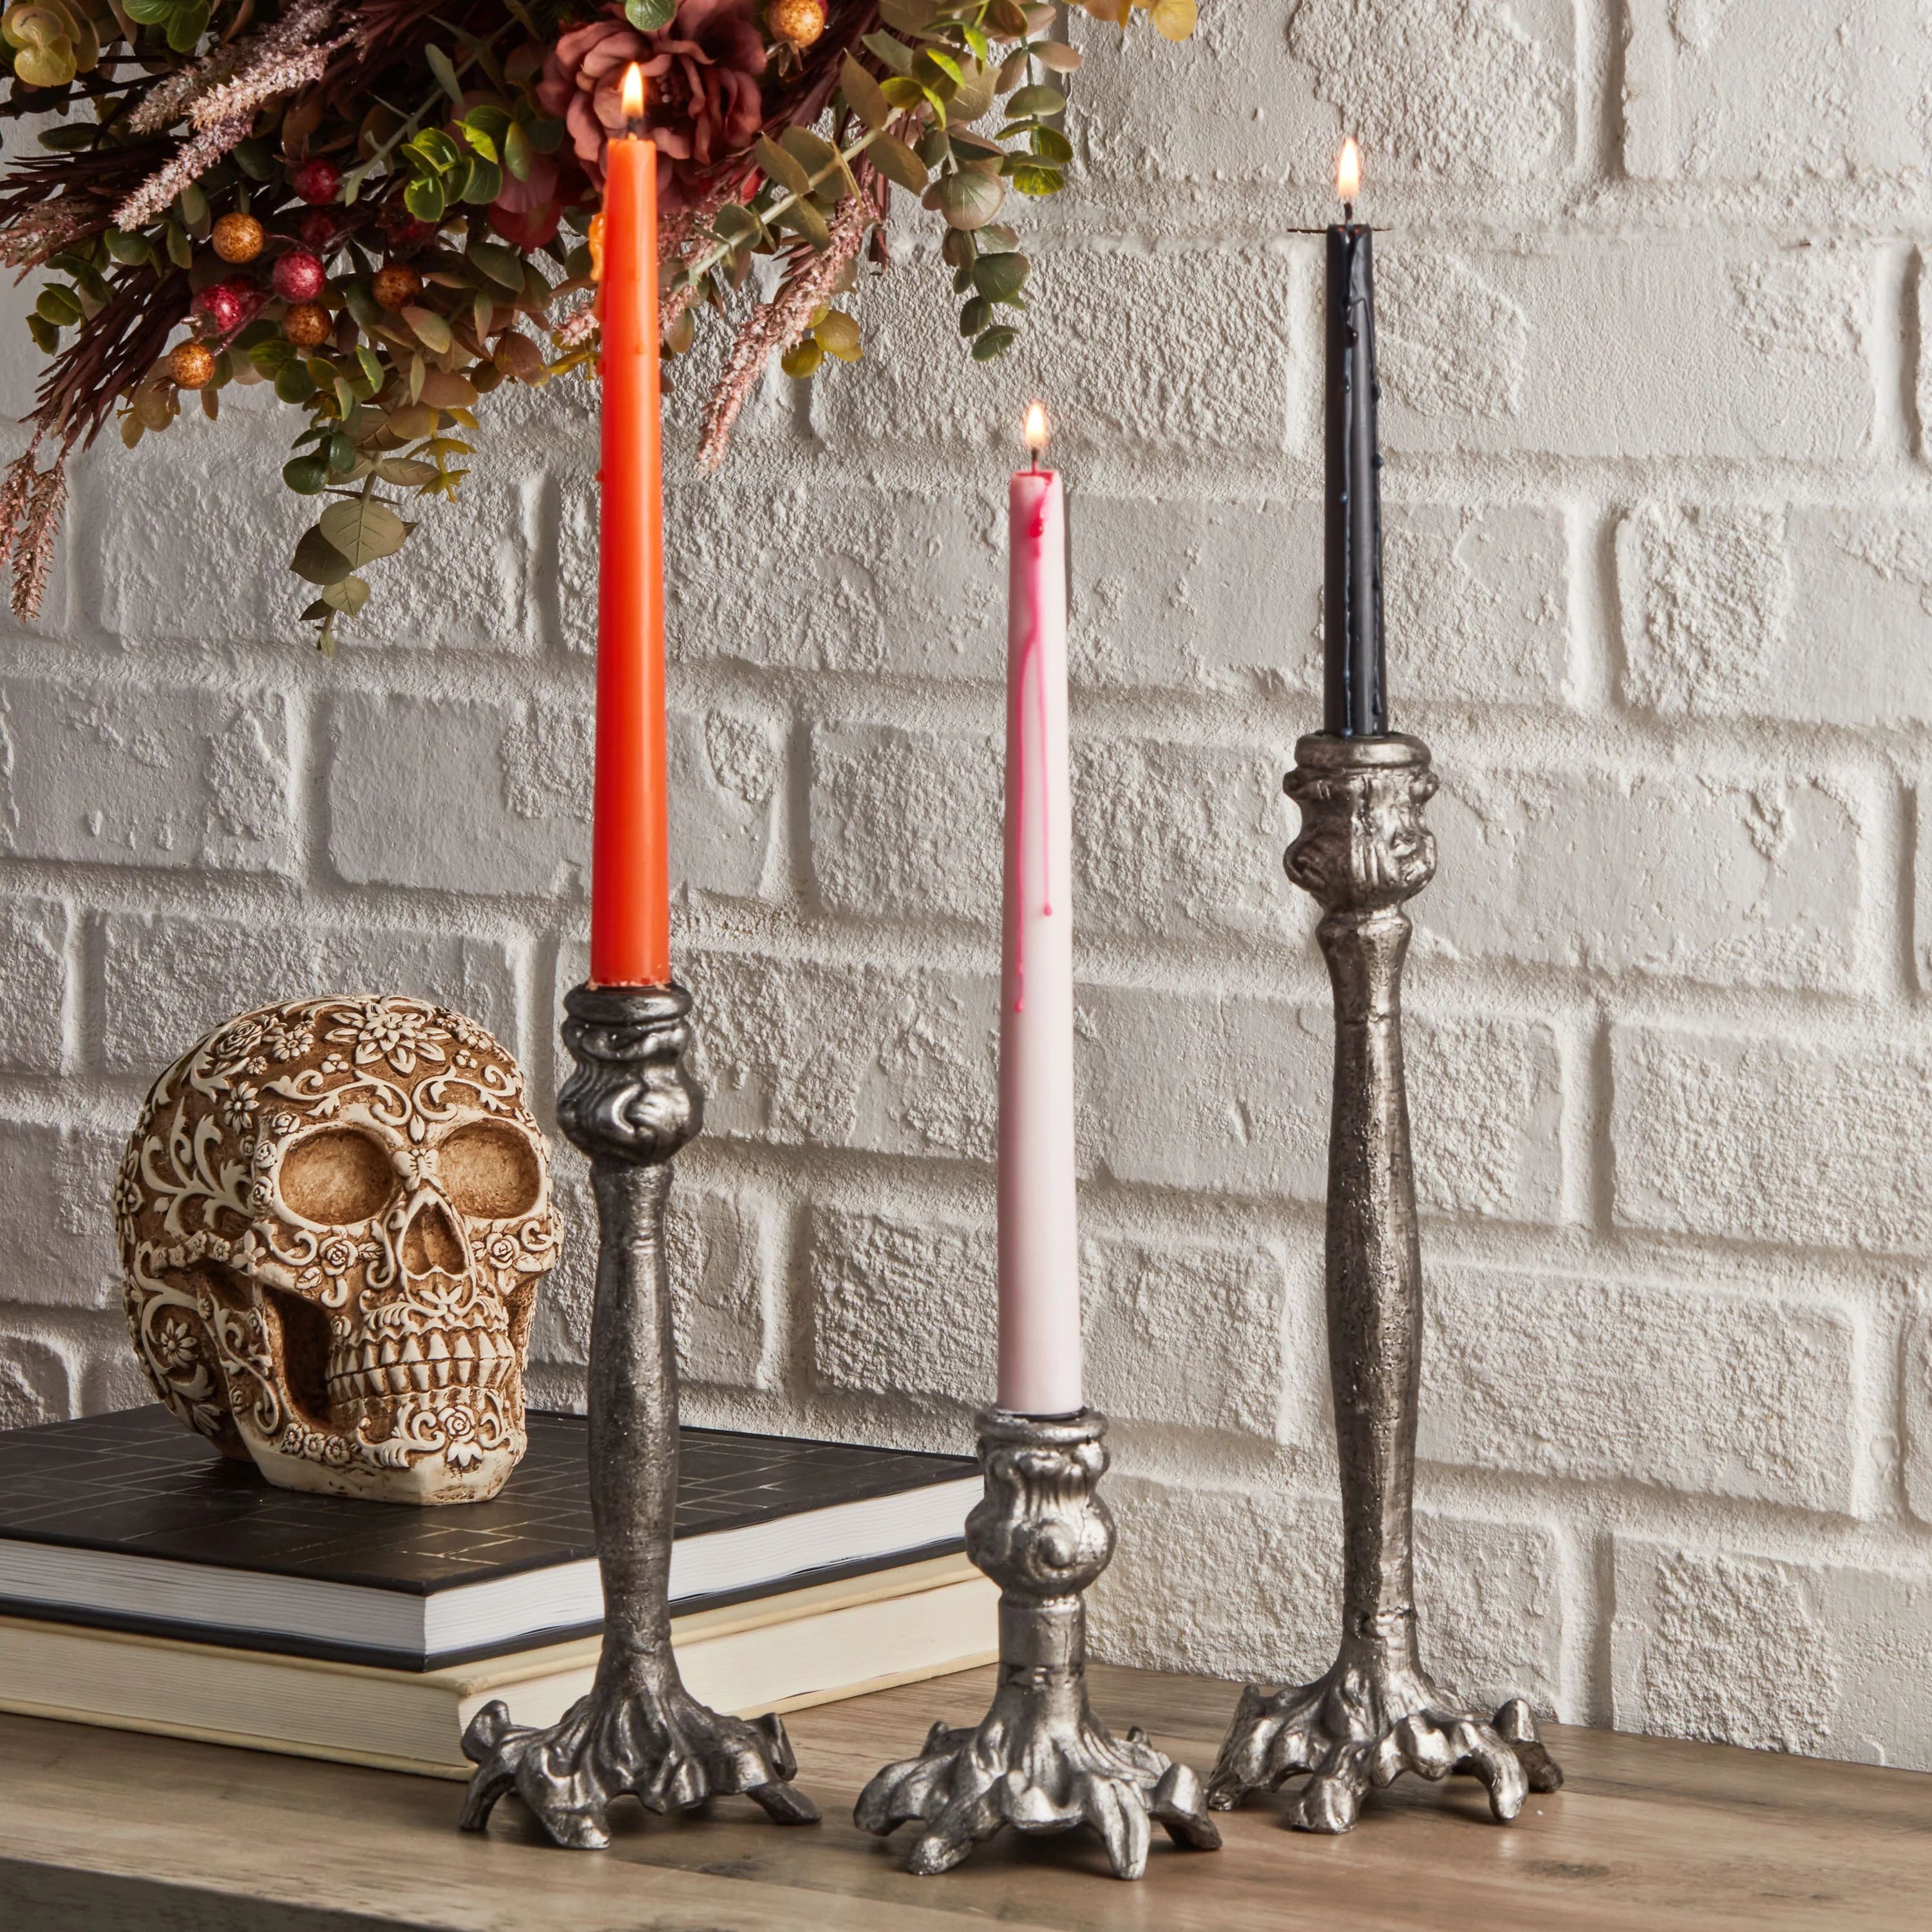 Way to Celebrate Set of 3 Black Resin Halloween Decorative Candle Holder, 4.5"H, 8.6"H & 11"H res... | Walmart (US)